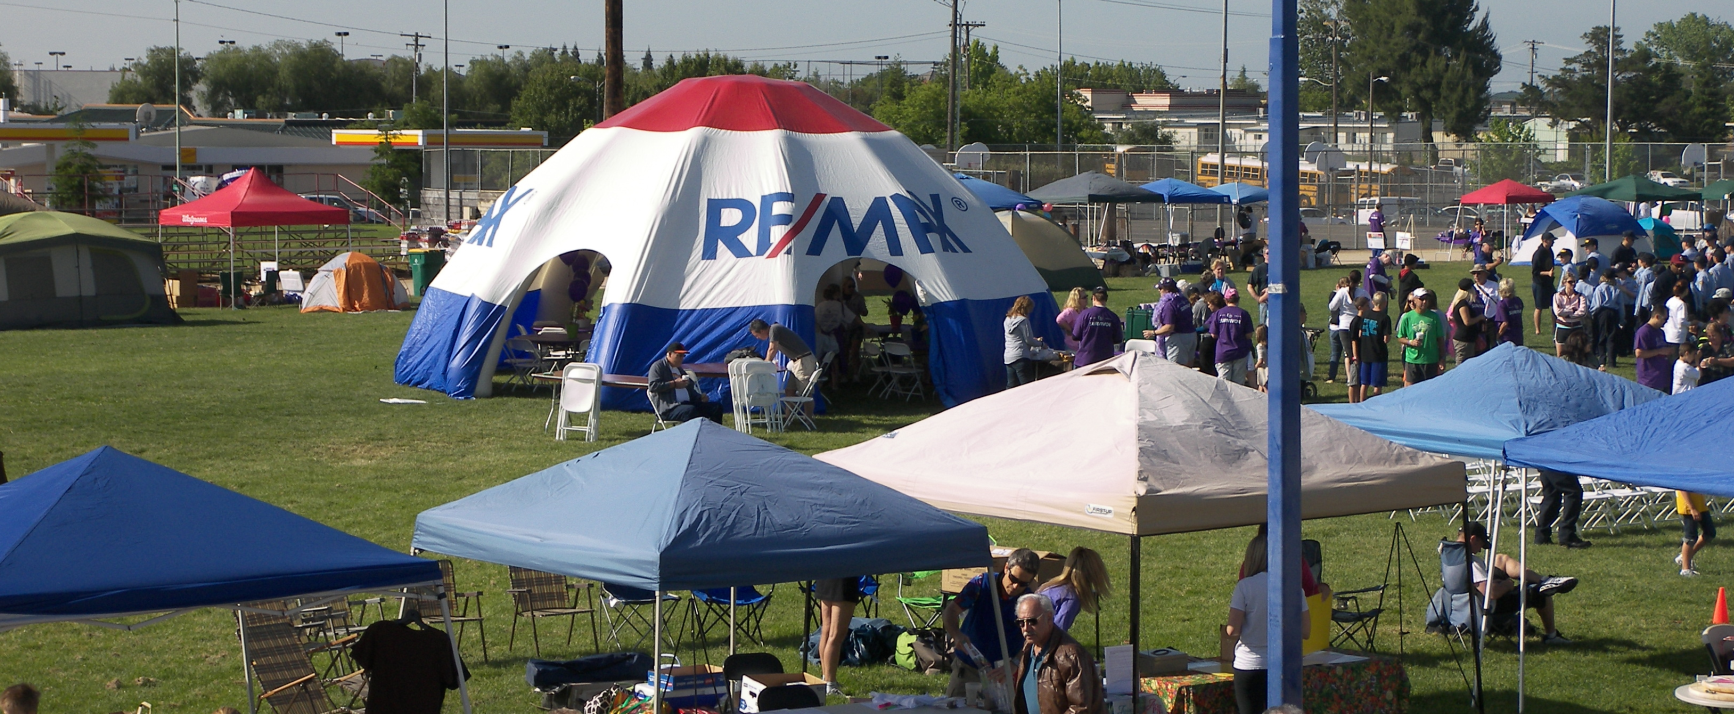 RE/MAX Tent at Relay For Life